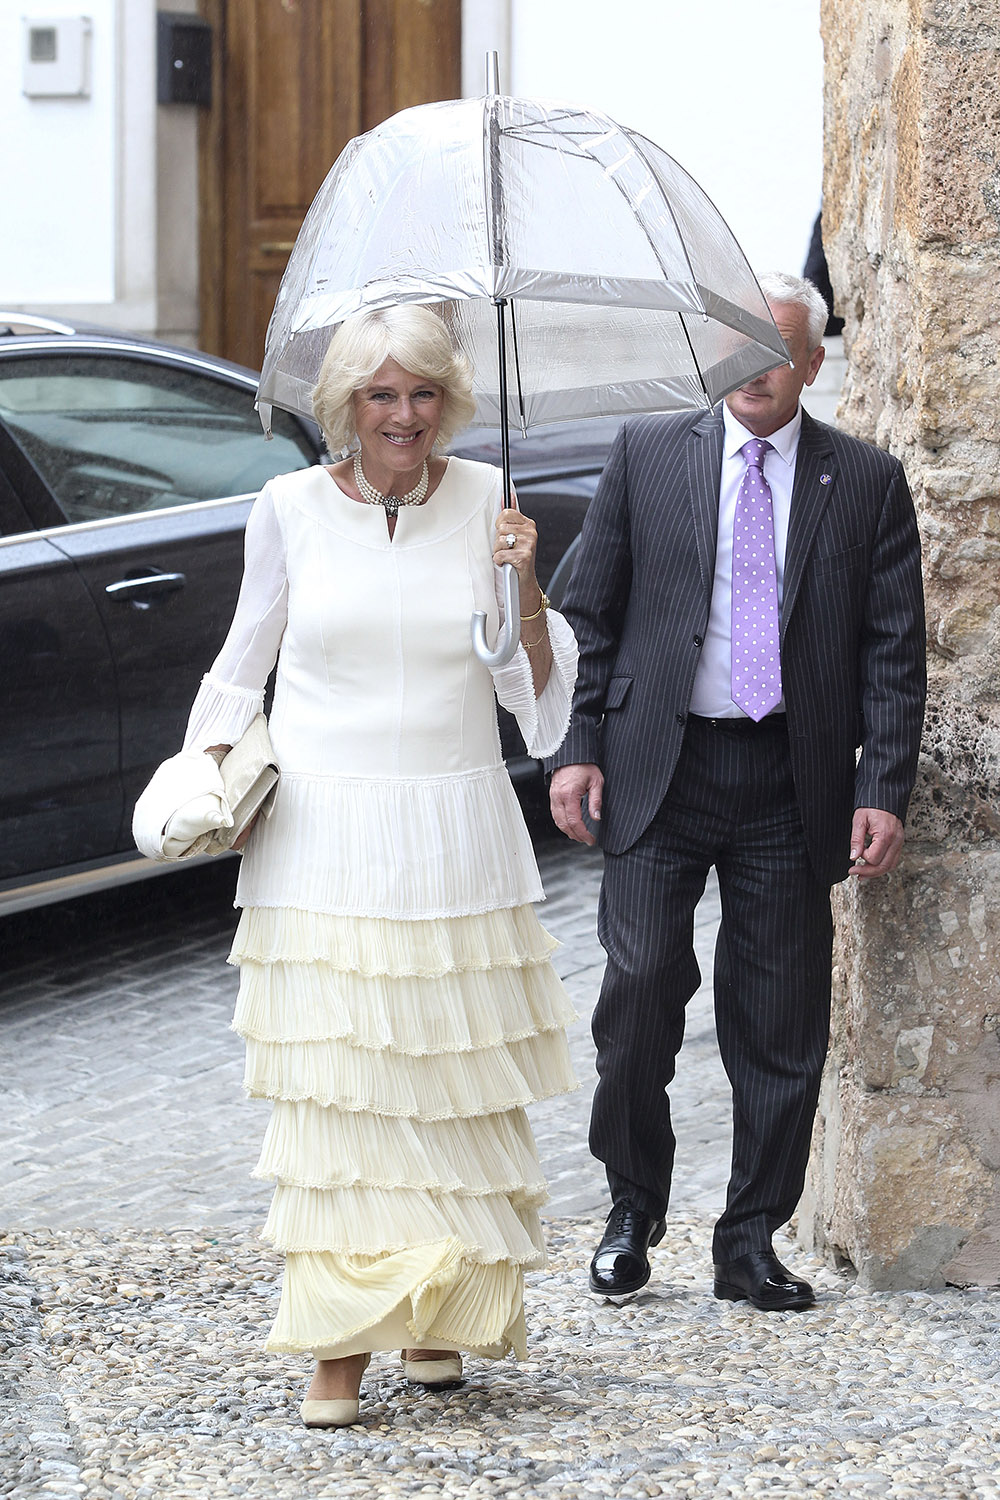 Camilla, The Duchess of Cornwall, attends the wedding of Lady Charlotte Wellesley and Alejandro Santo Domingo.